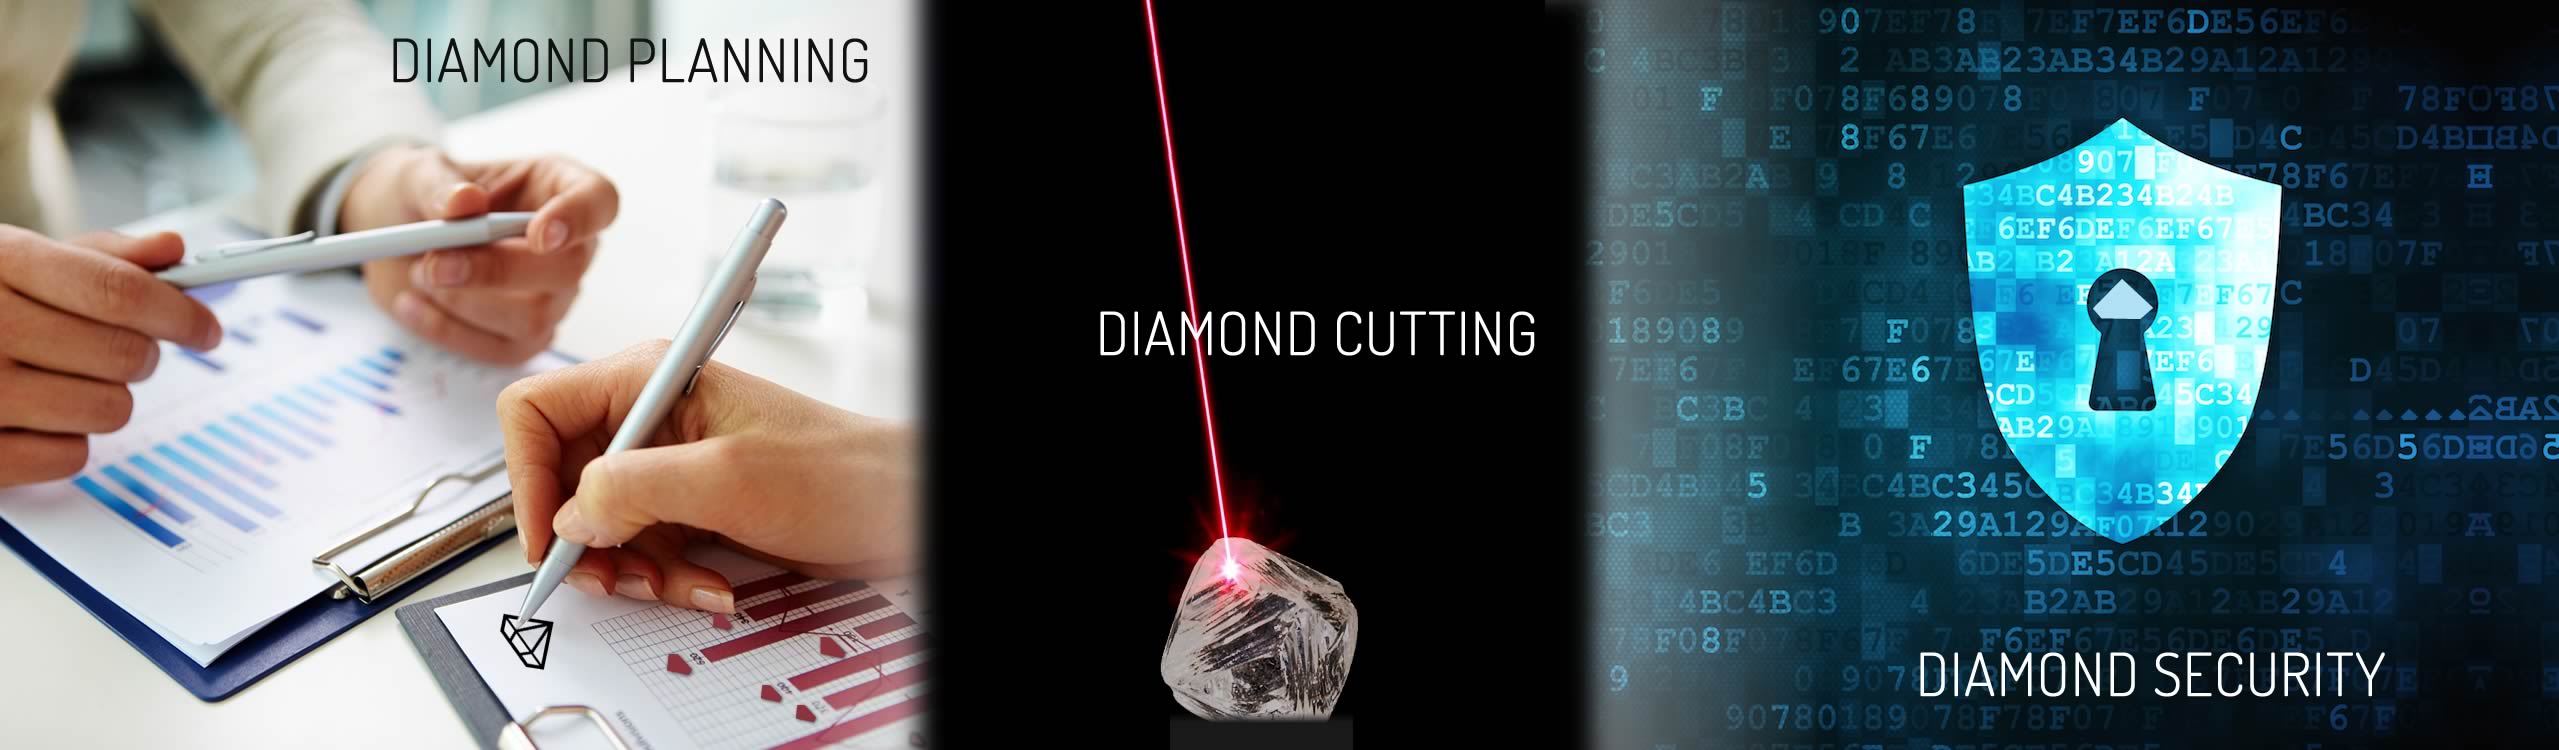 Diamond, Products, Processing